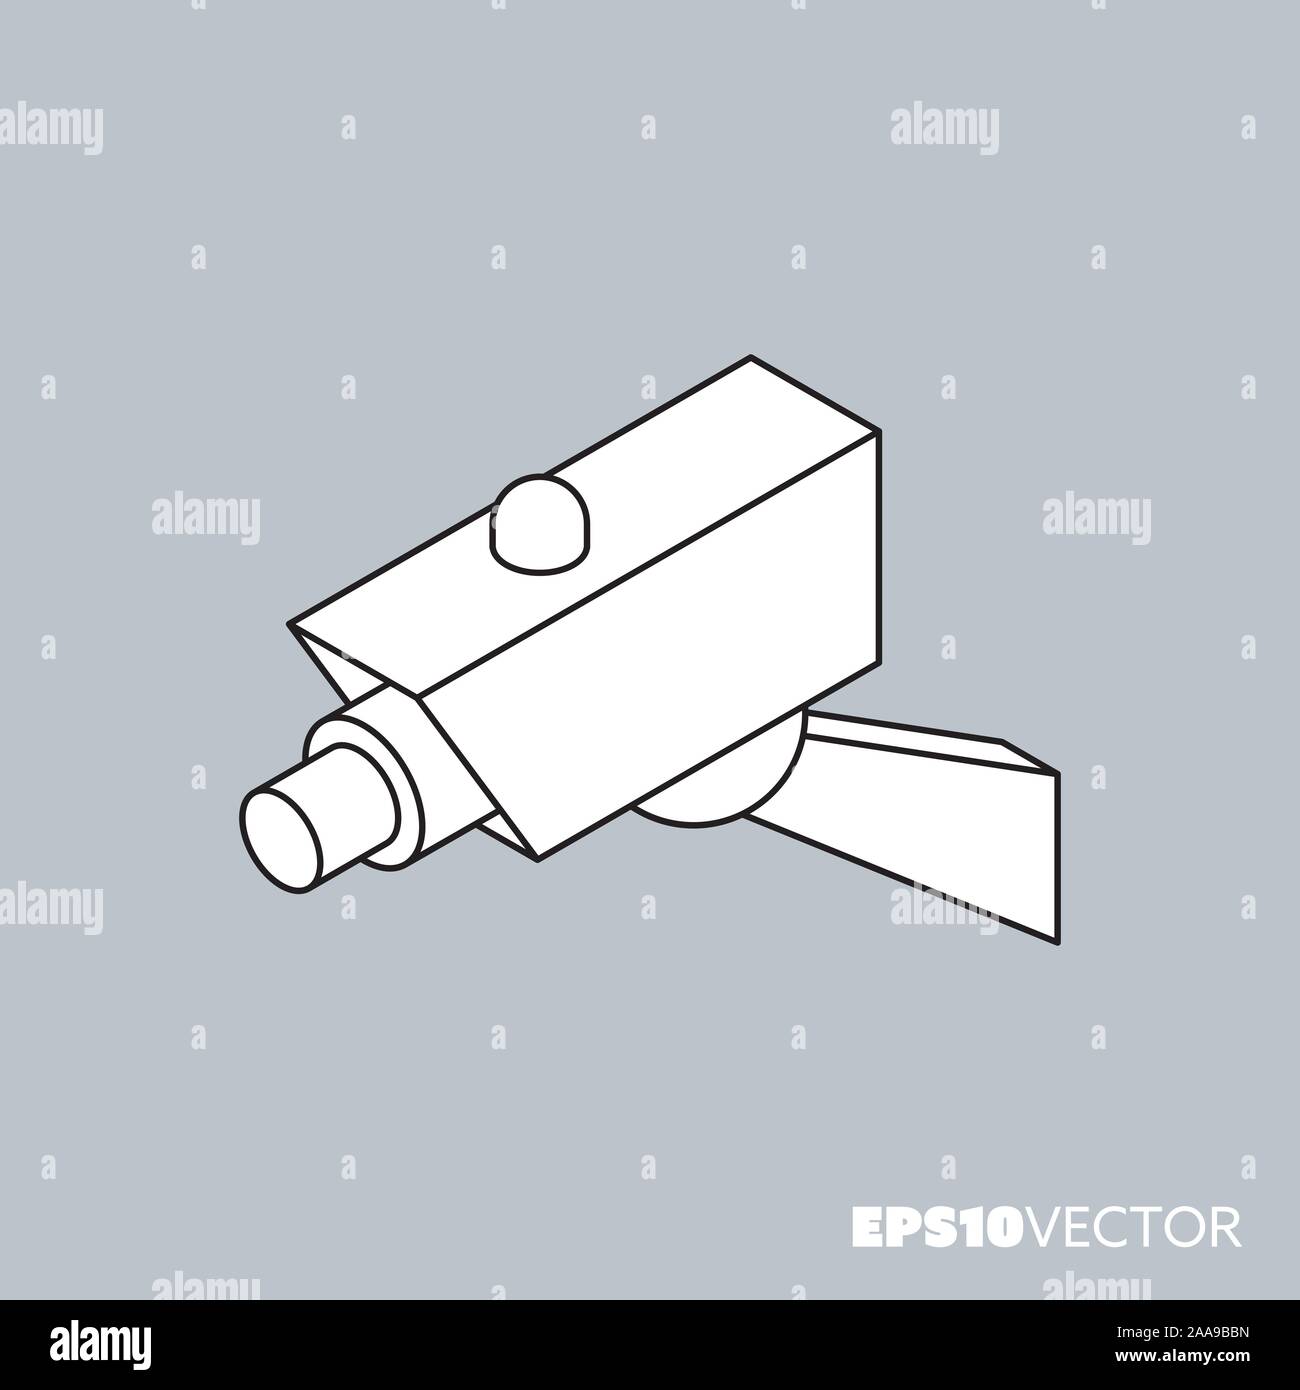 Surveillance camera icon, outline symbol. Technology and security concept vector illustration. Stock Vector